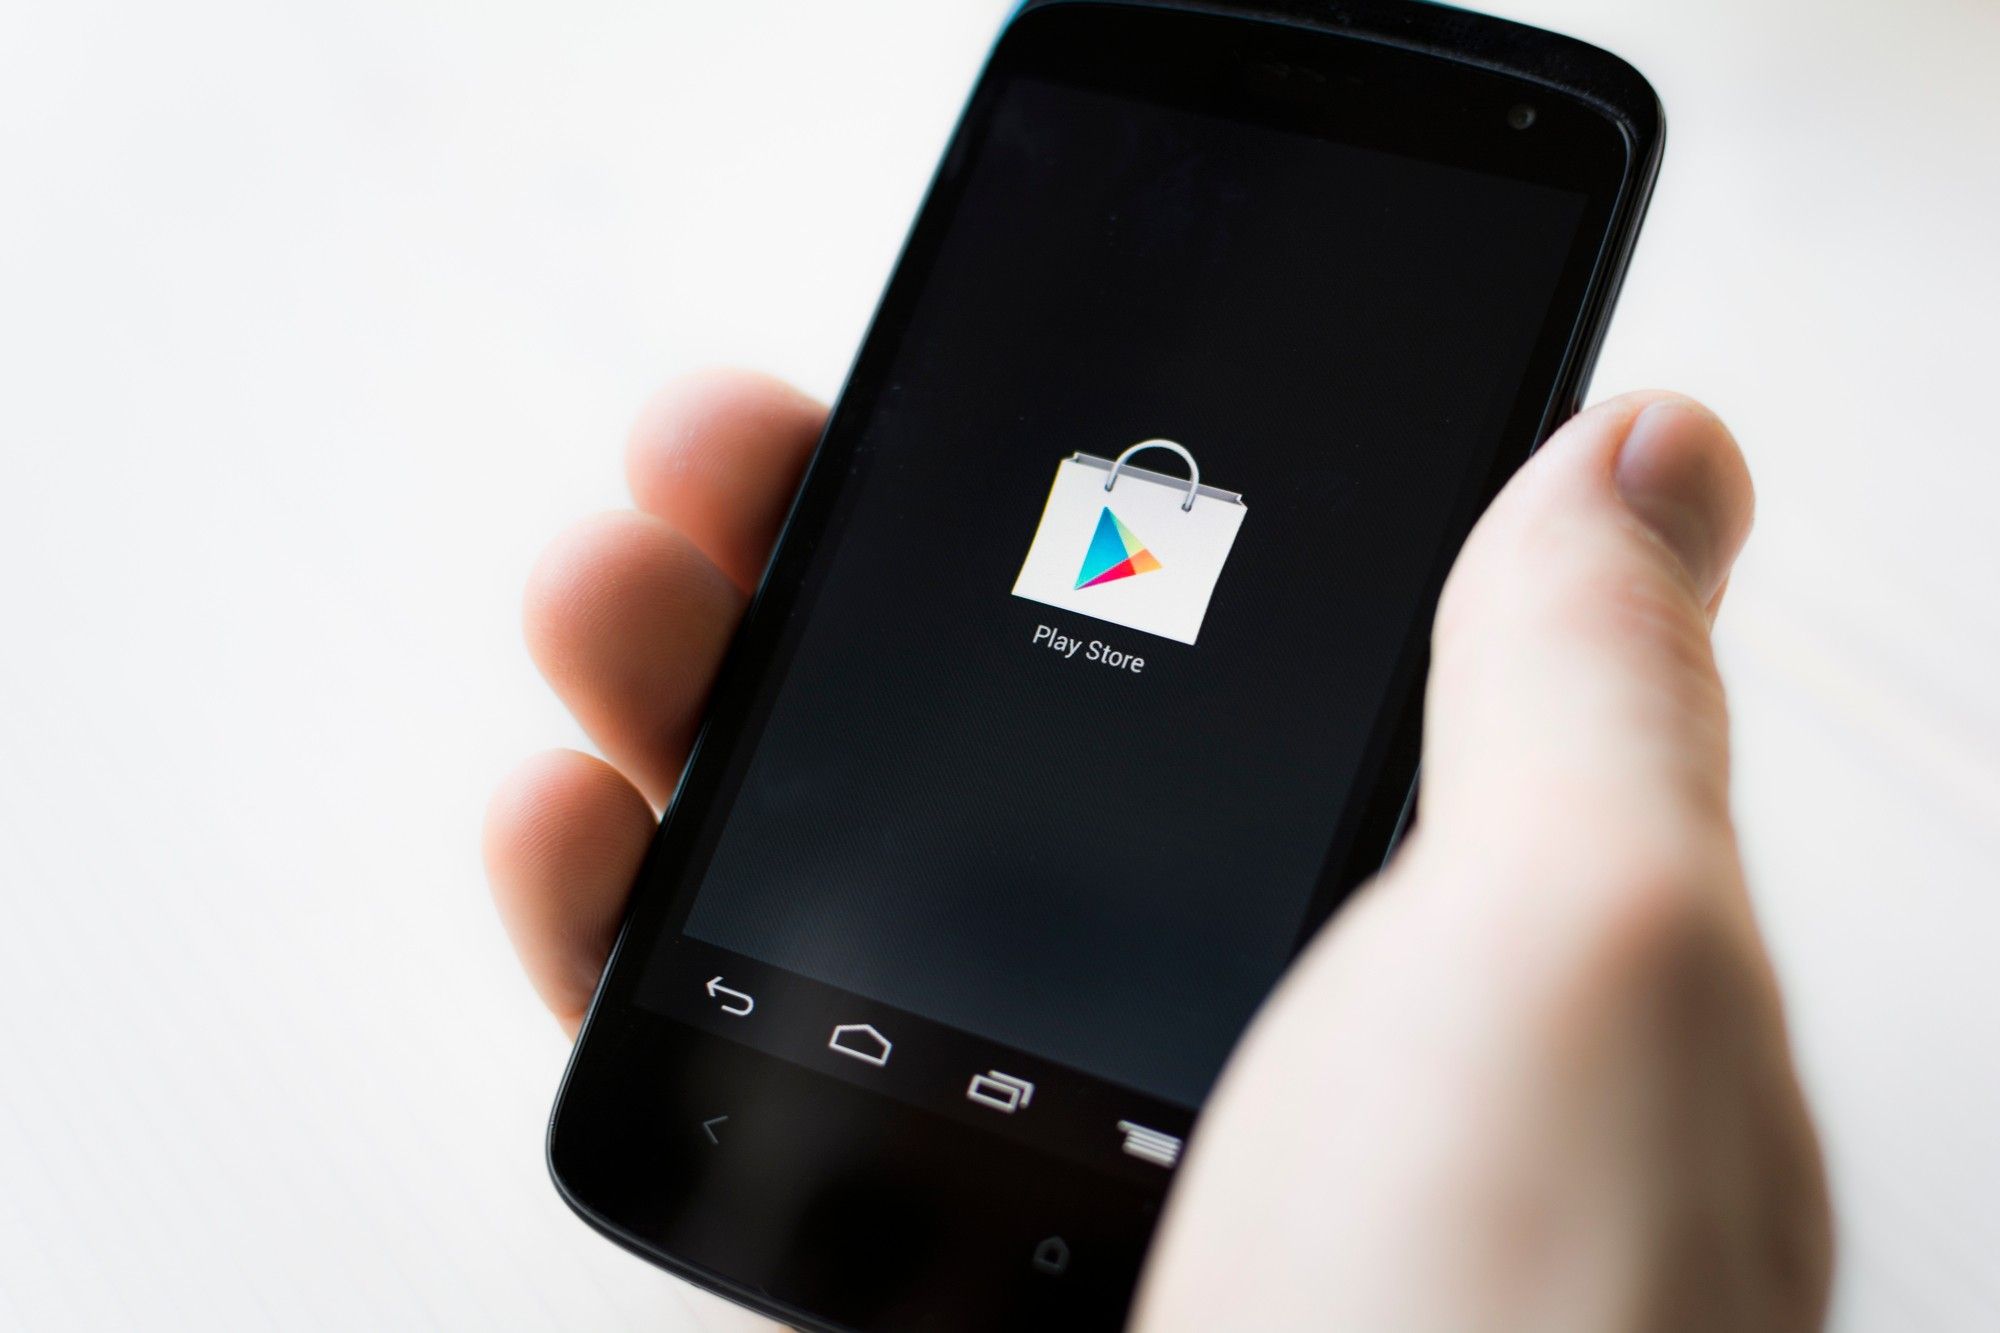 Google Play allegedly takes advantage of their app store monopoly with unfair fees.